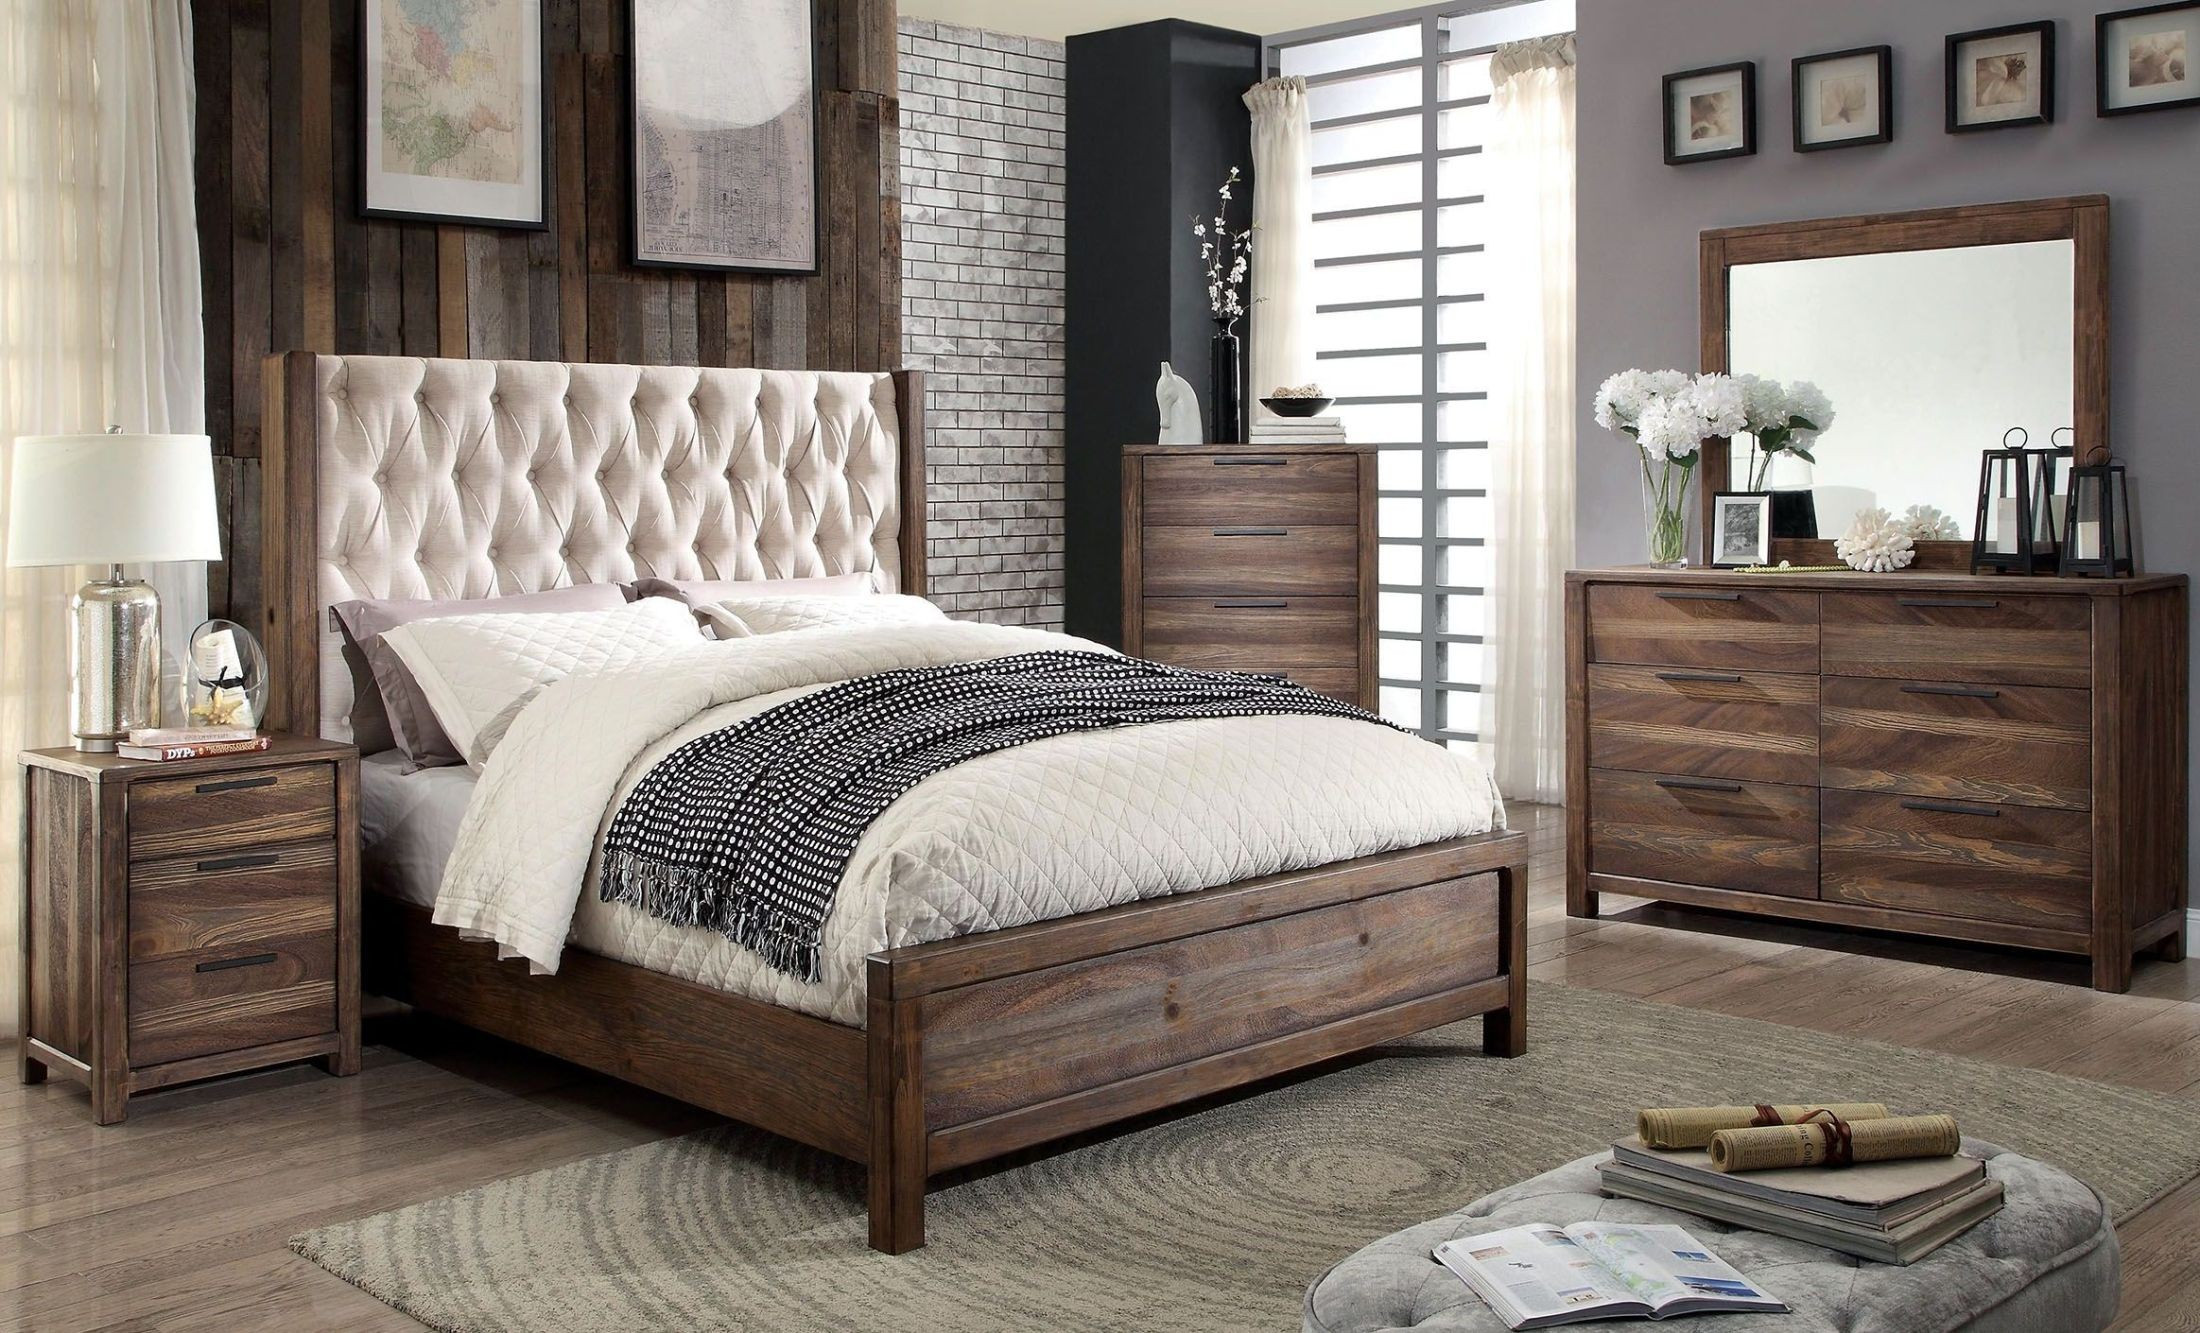 Cheap Rustic Bedroom Furniture Sets
 Hutchinson Rustic Natural Tone Upholstered Panel Bedroom